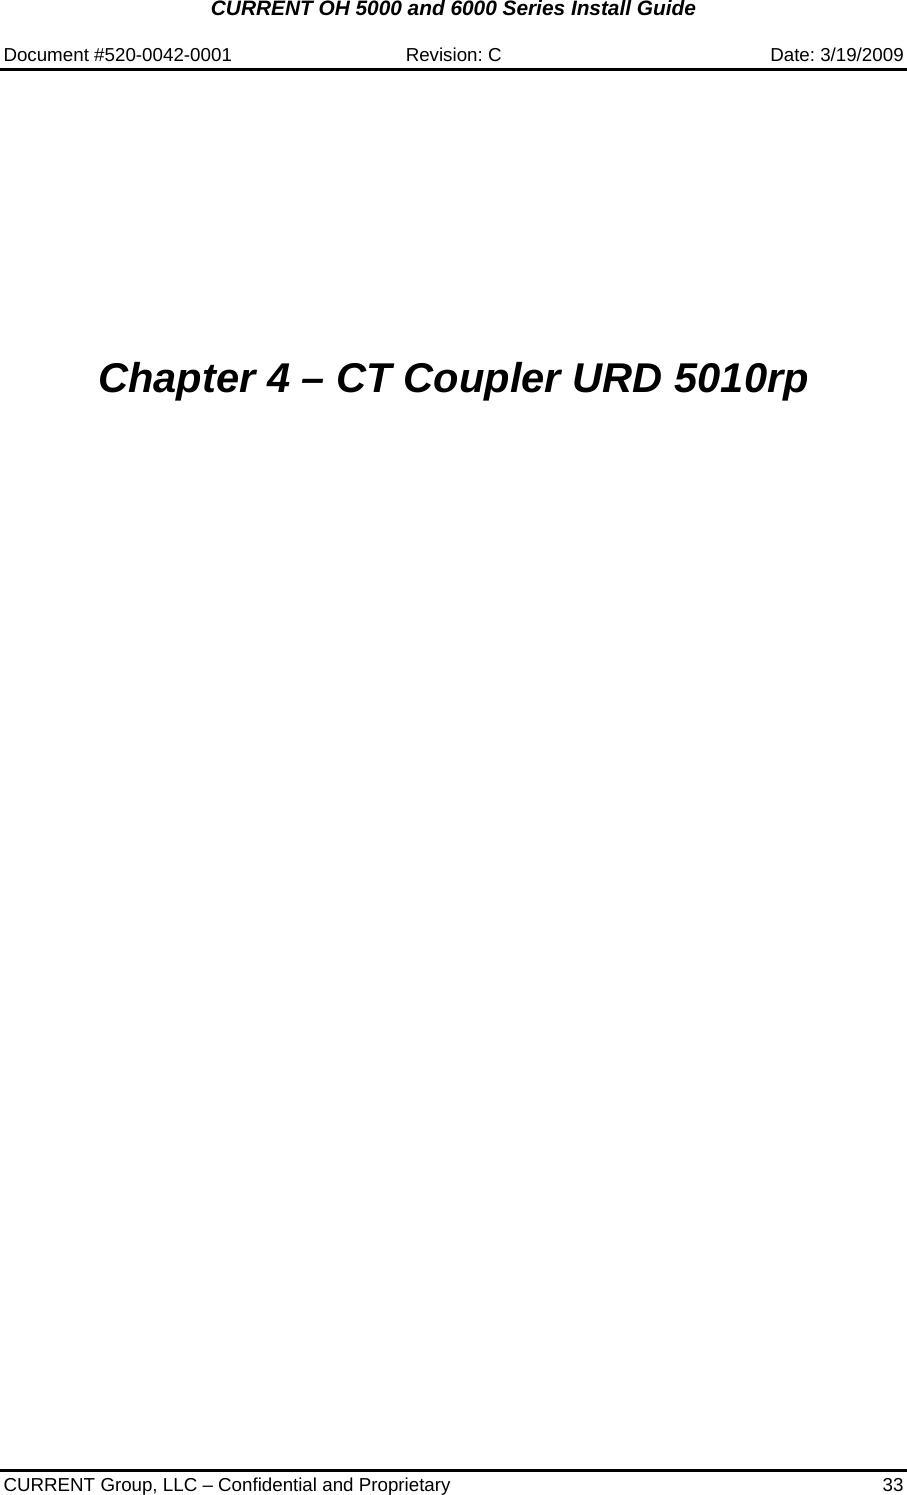 CURRENT OH 5000 and 6000 Series Install Guide  Document #520-0042-0001  Revision: C  Date: 3/19/2009  CURRENT Group, LLC – Confidential and Proprietary  33           Chapter 4 – CT Coupler URD 5010rp      